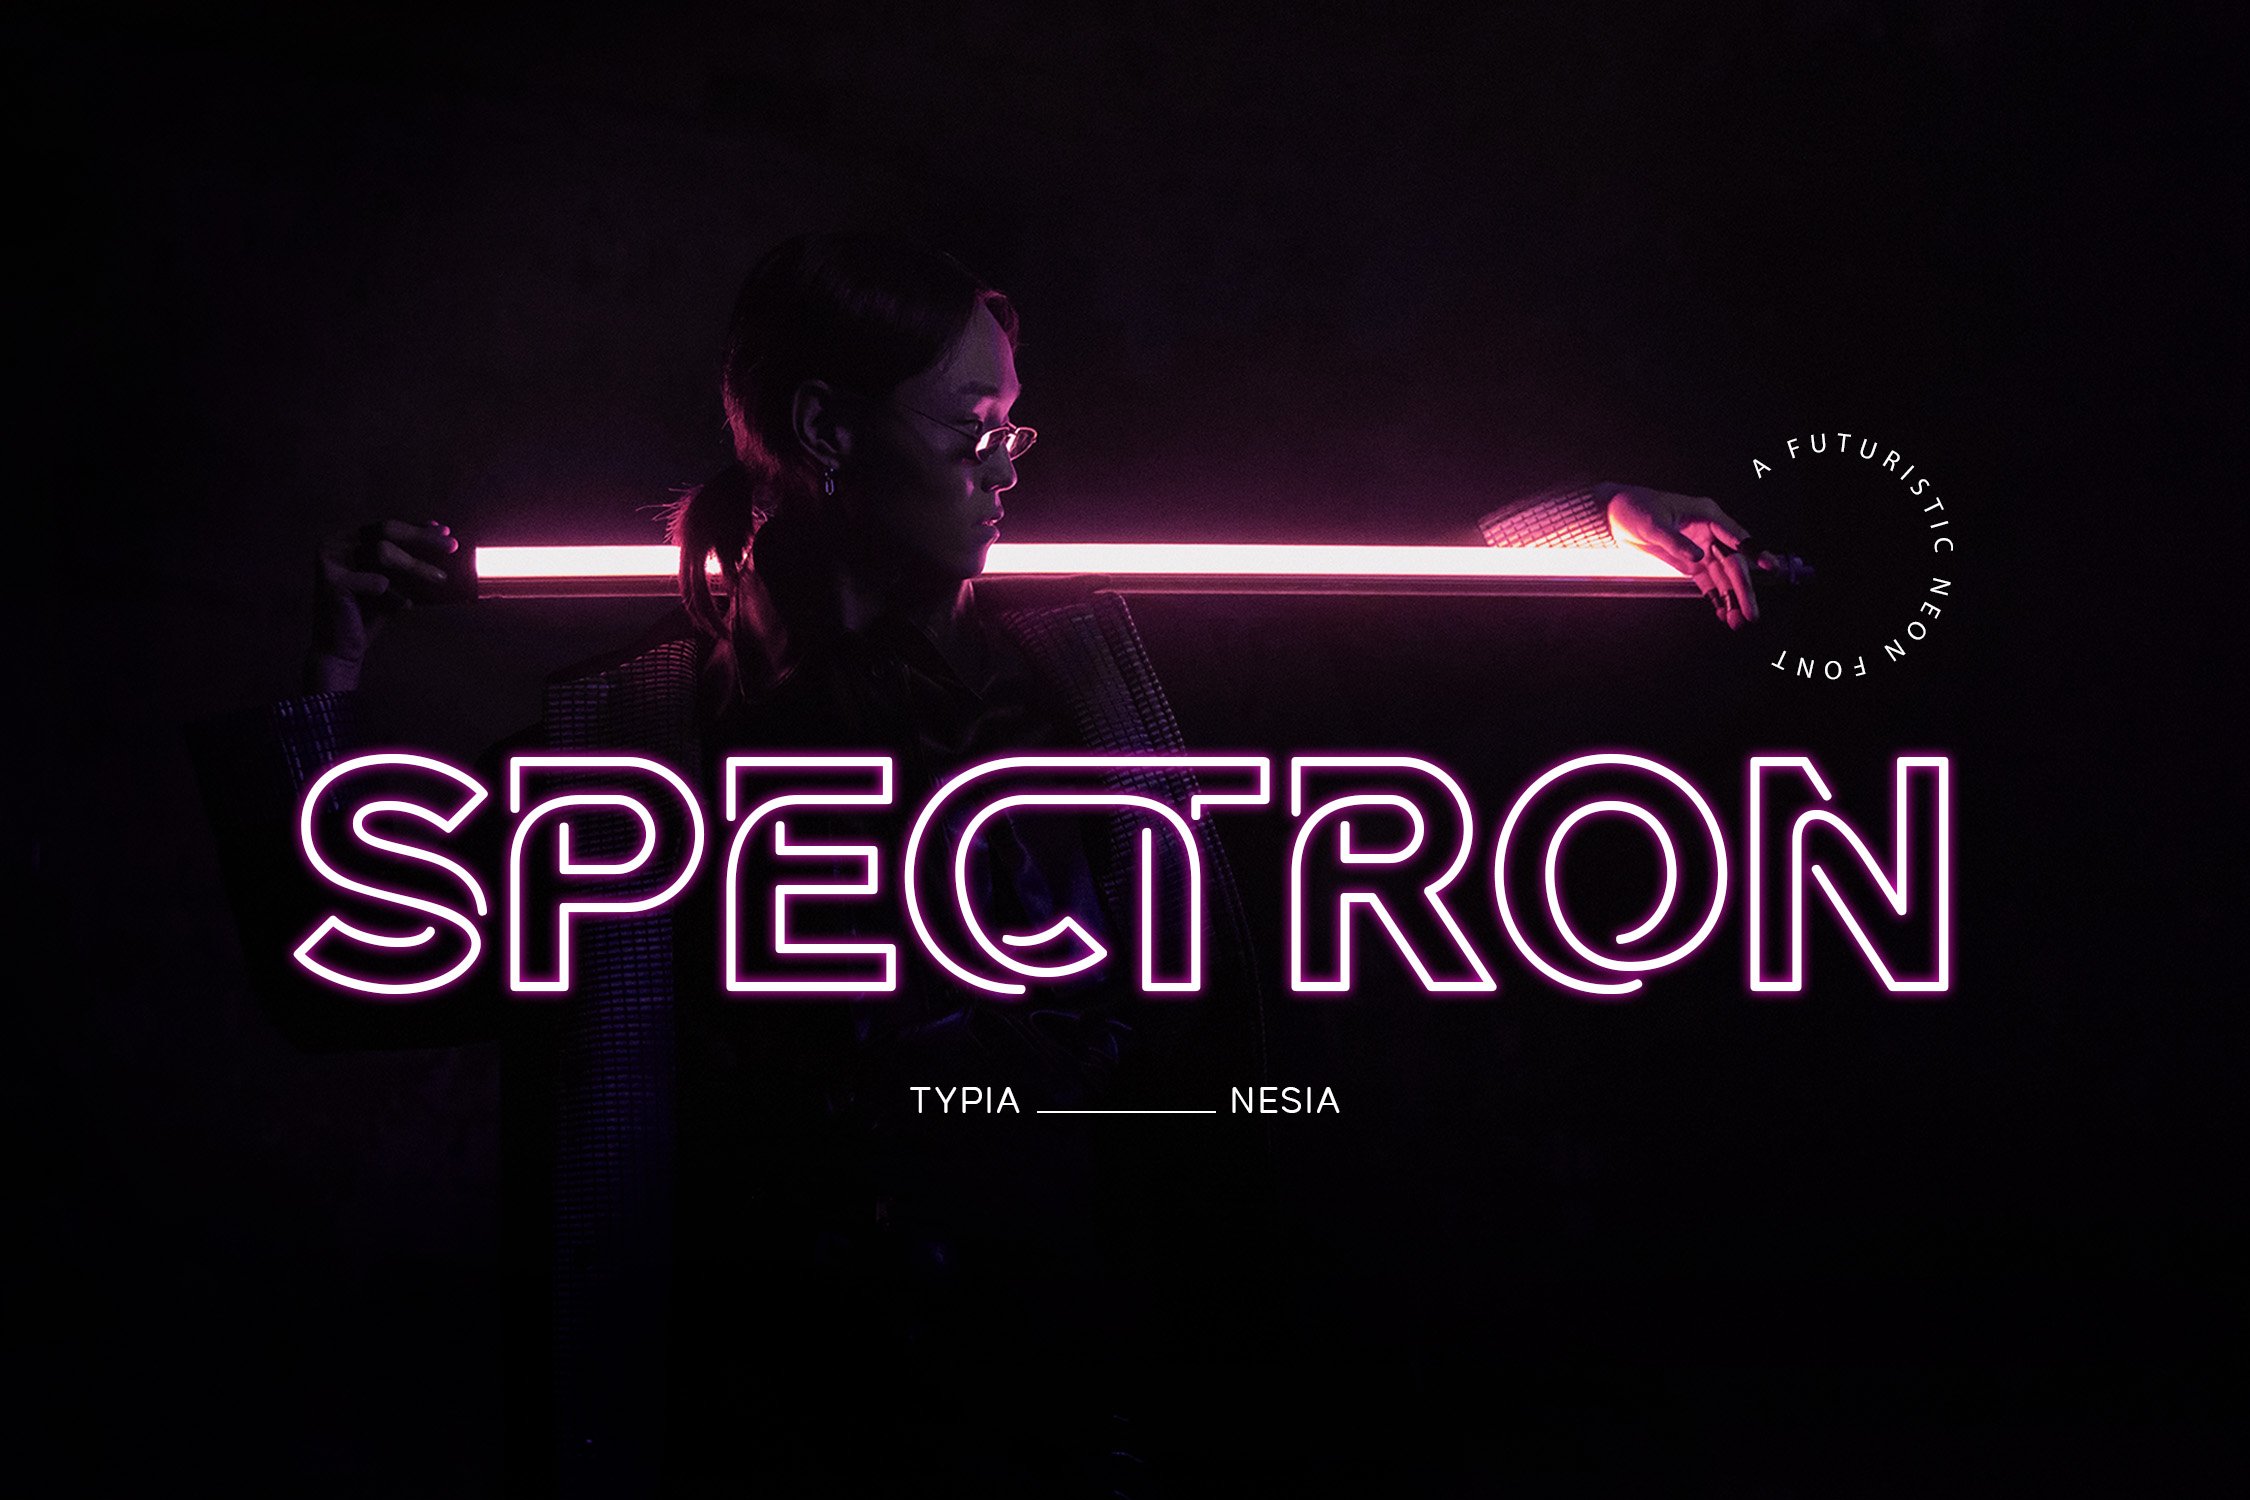 Spectron - Neon Font cover image.